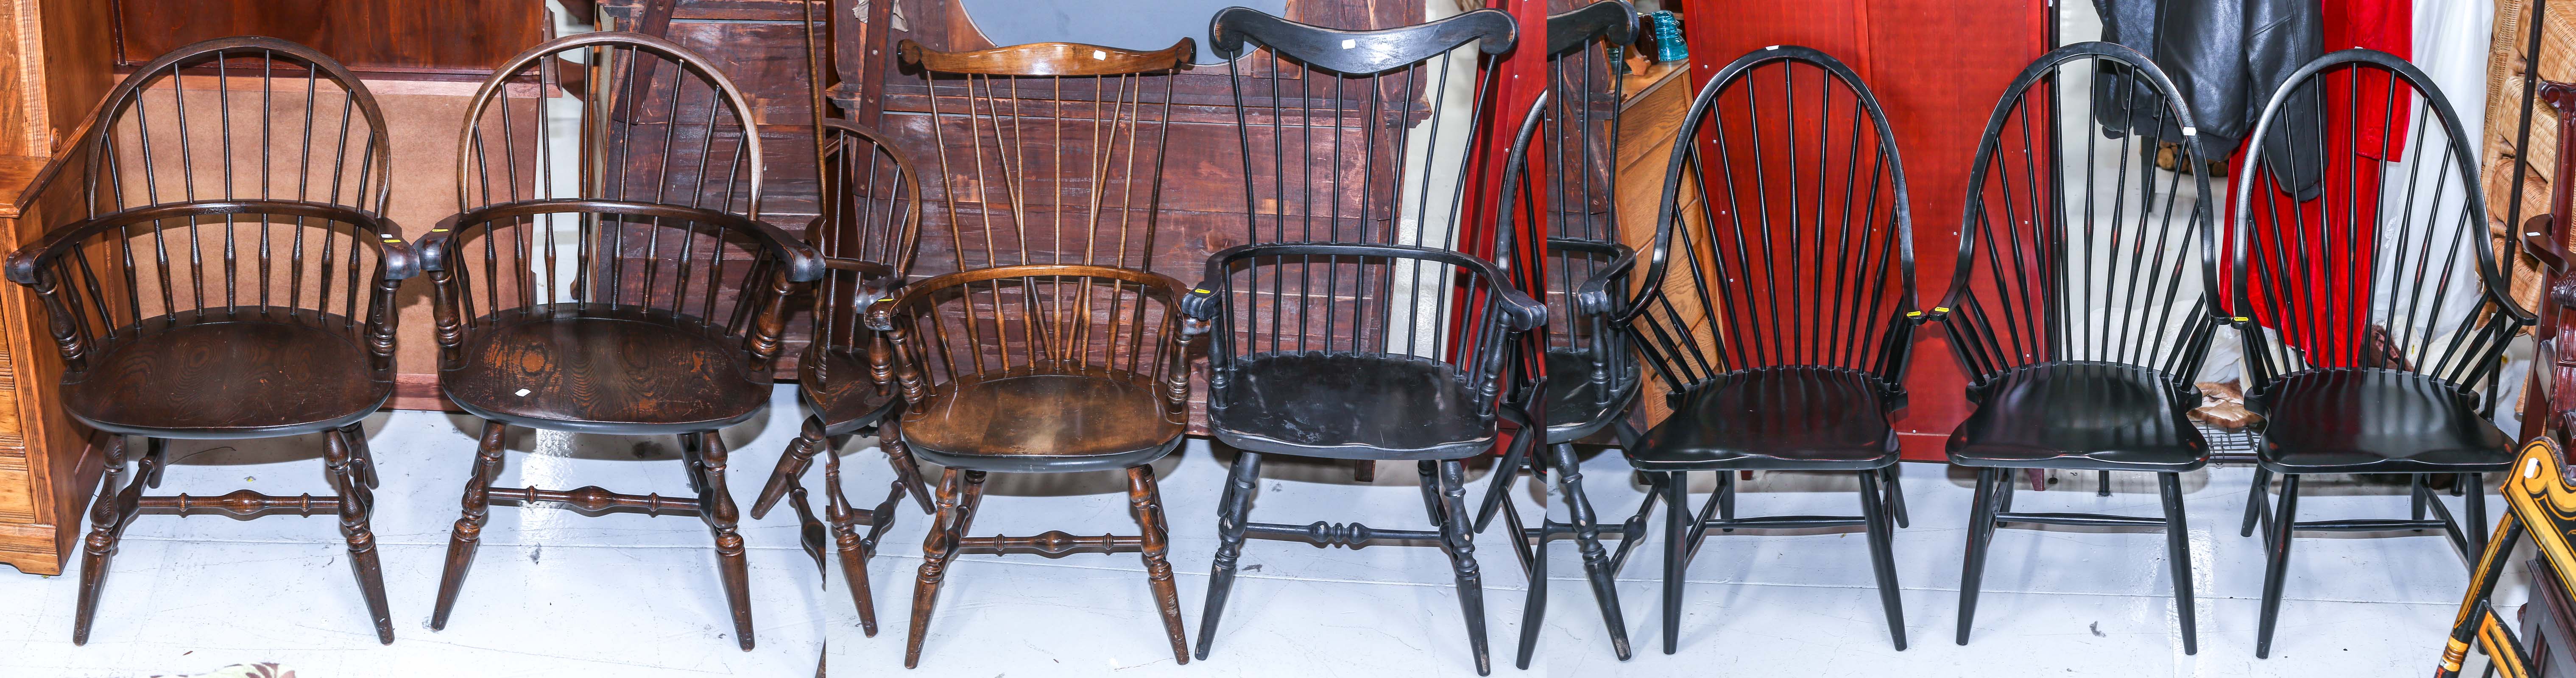 SEVEN AMERICAN WINDSOR STYLE ARMCHAIRS 2e9673